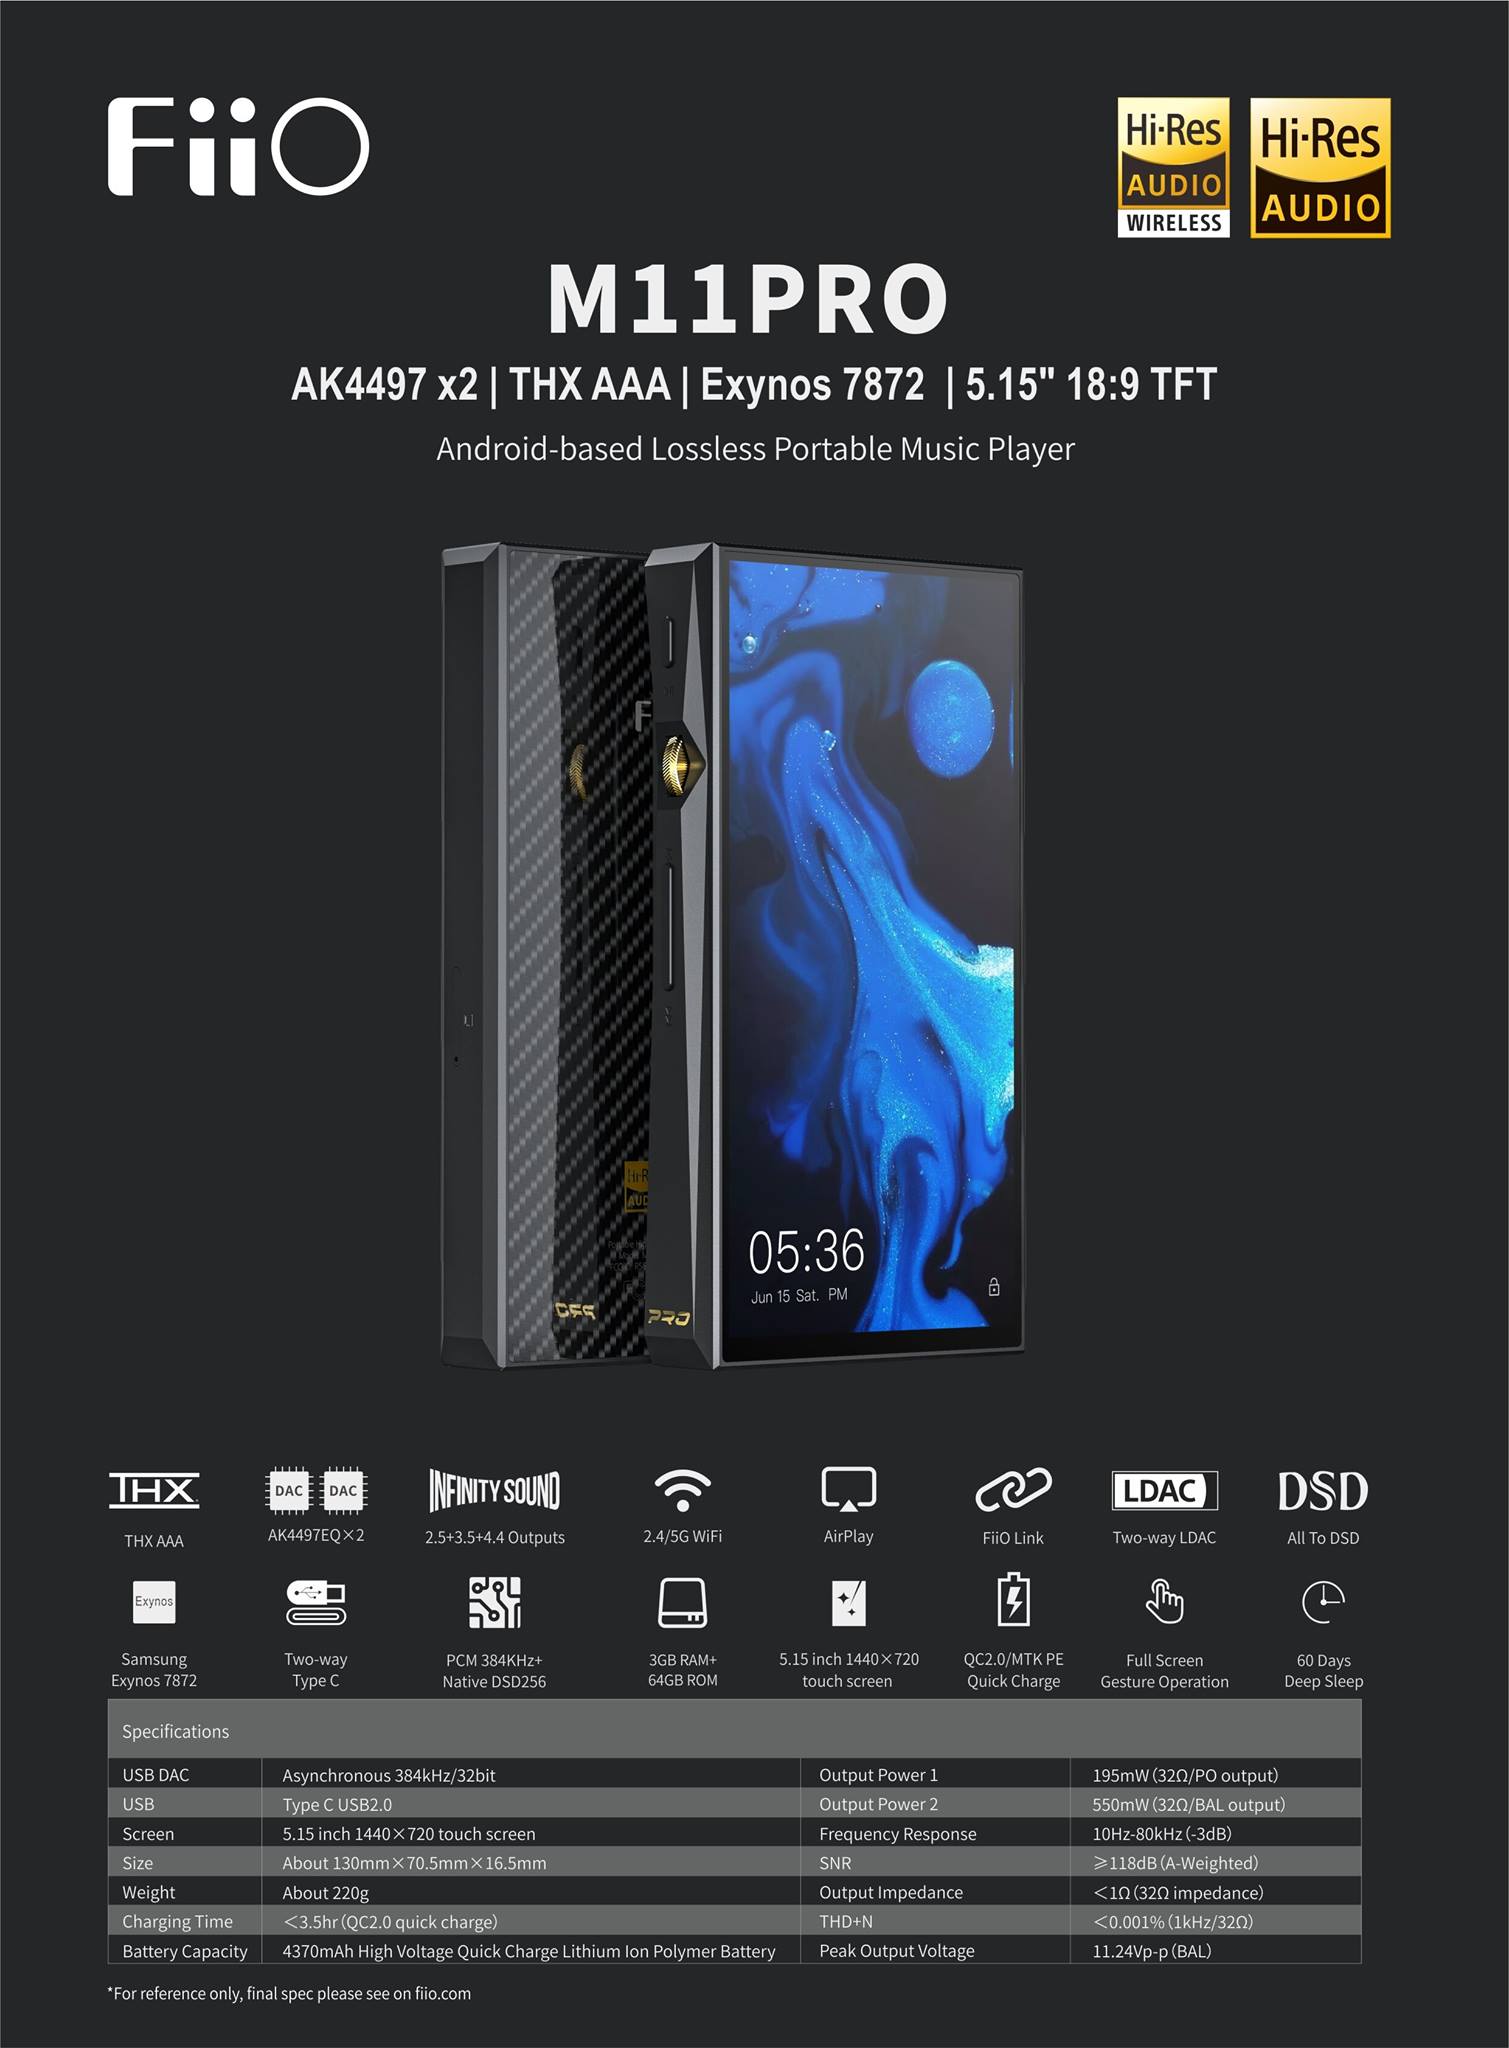 FiiO just dropper the curtains on the M11 PRO Digital Audio Player